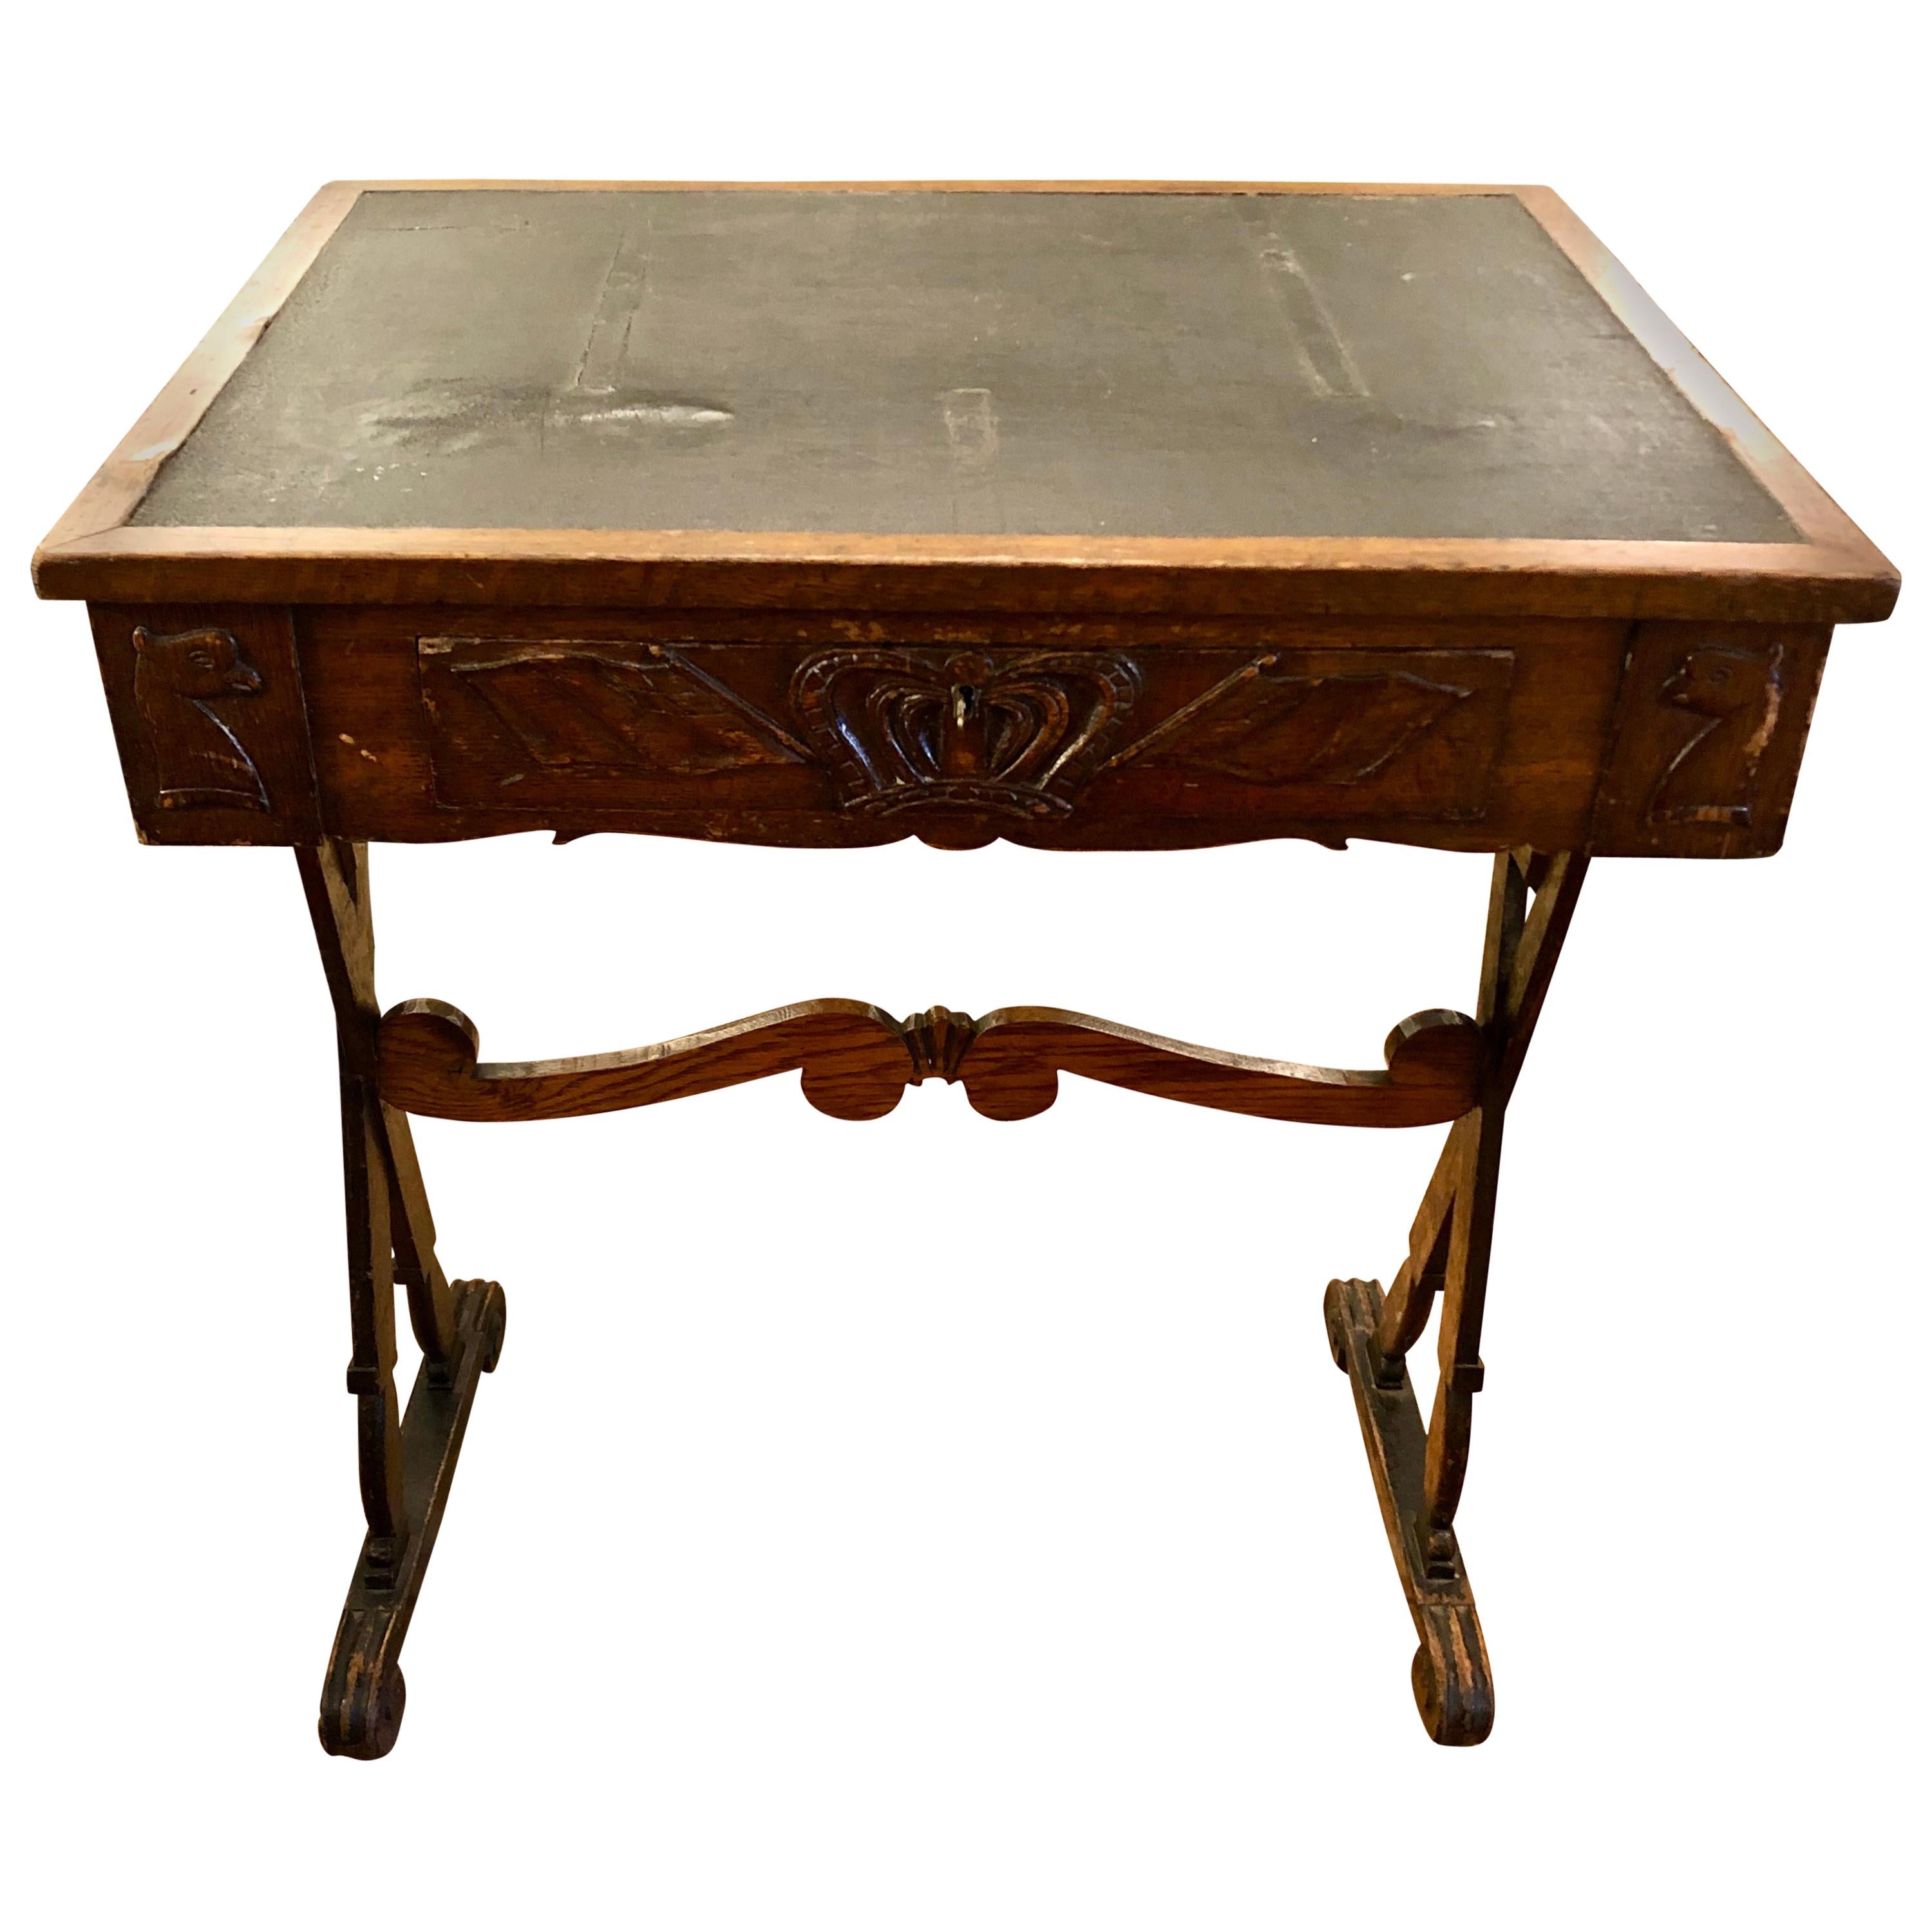 Charming Weathered Antique English Carved Oak End Table with Crown